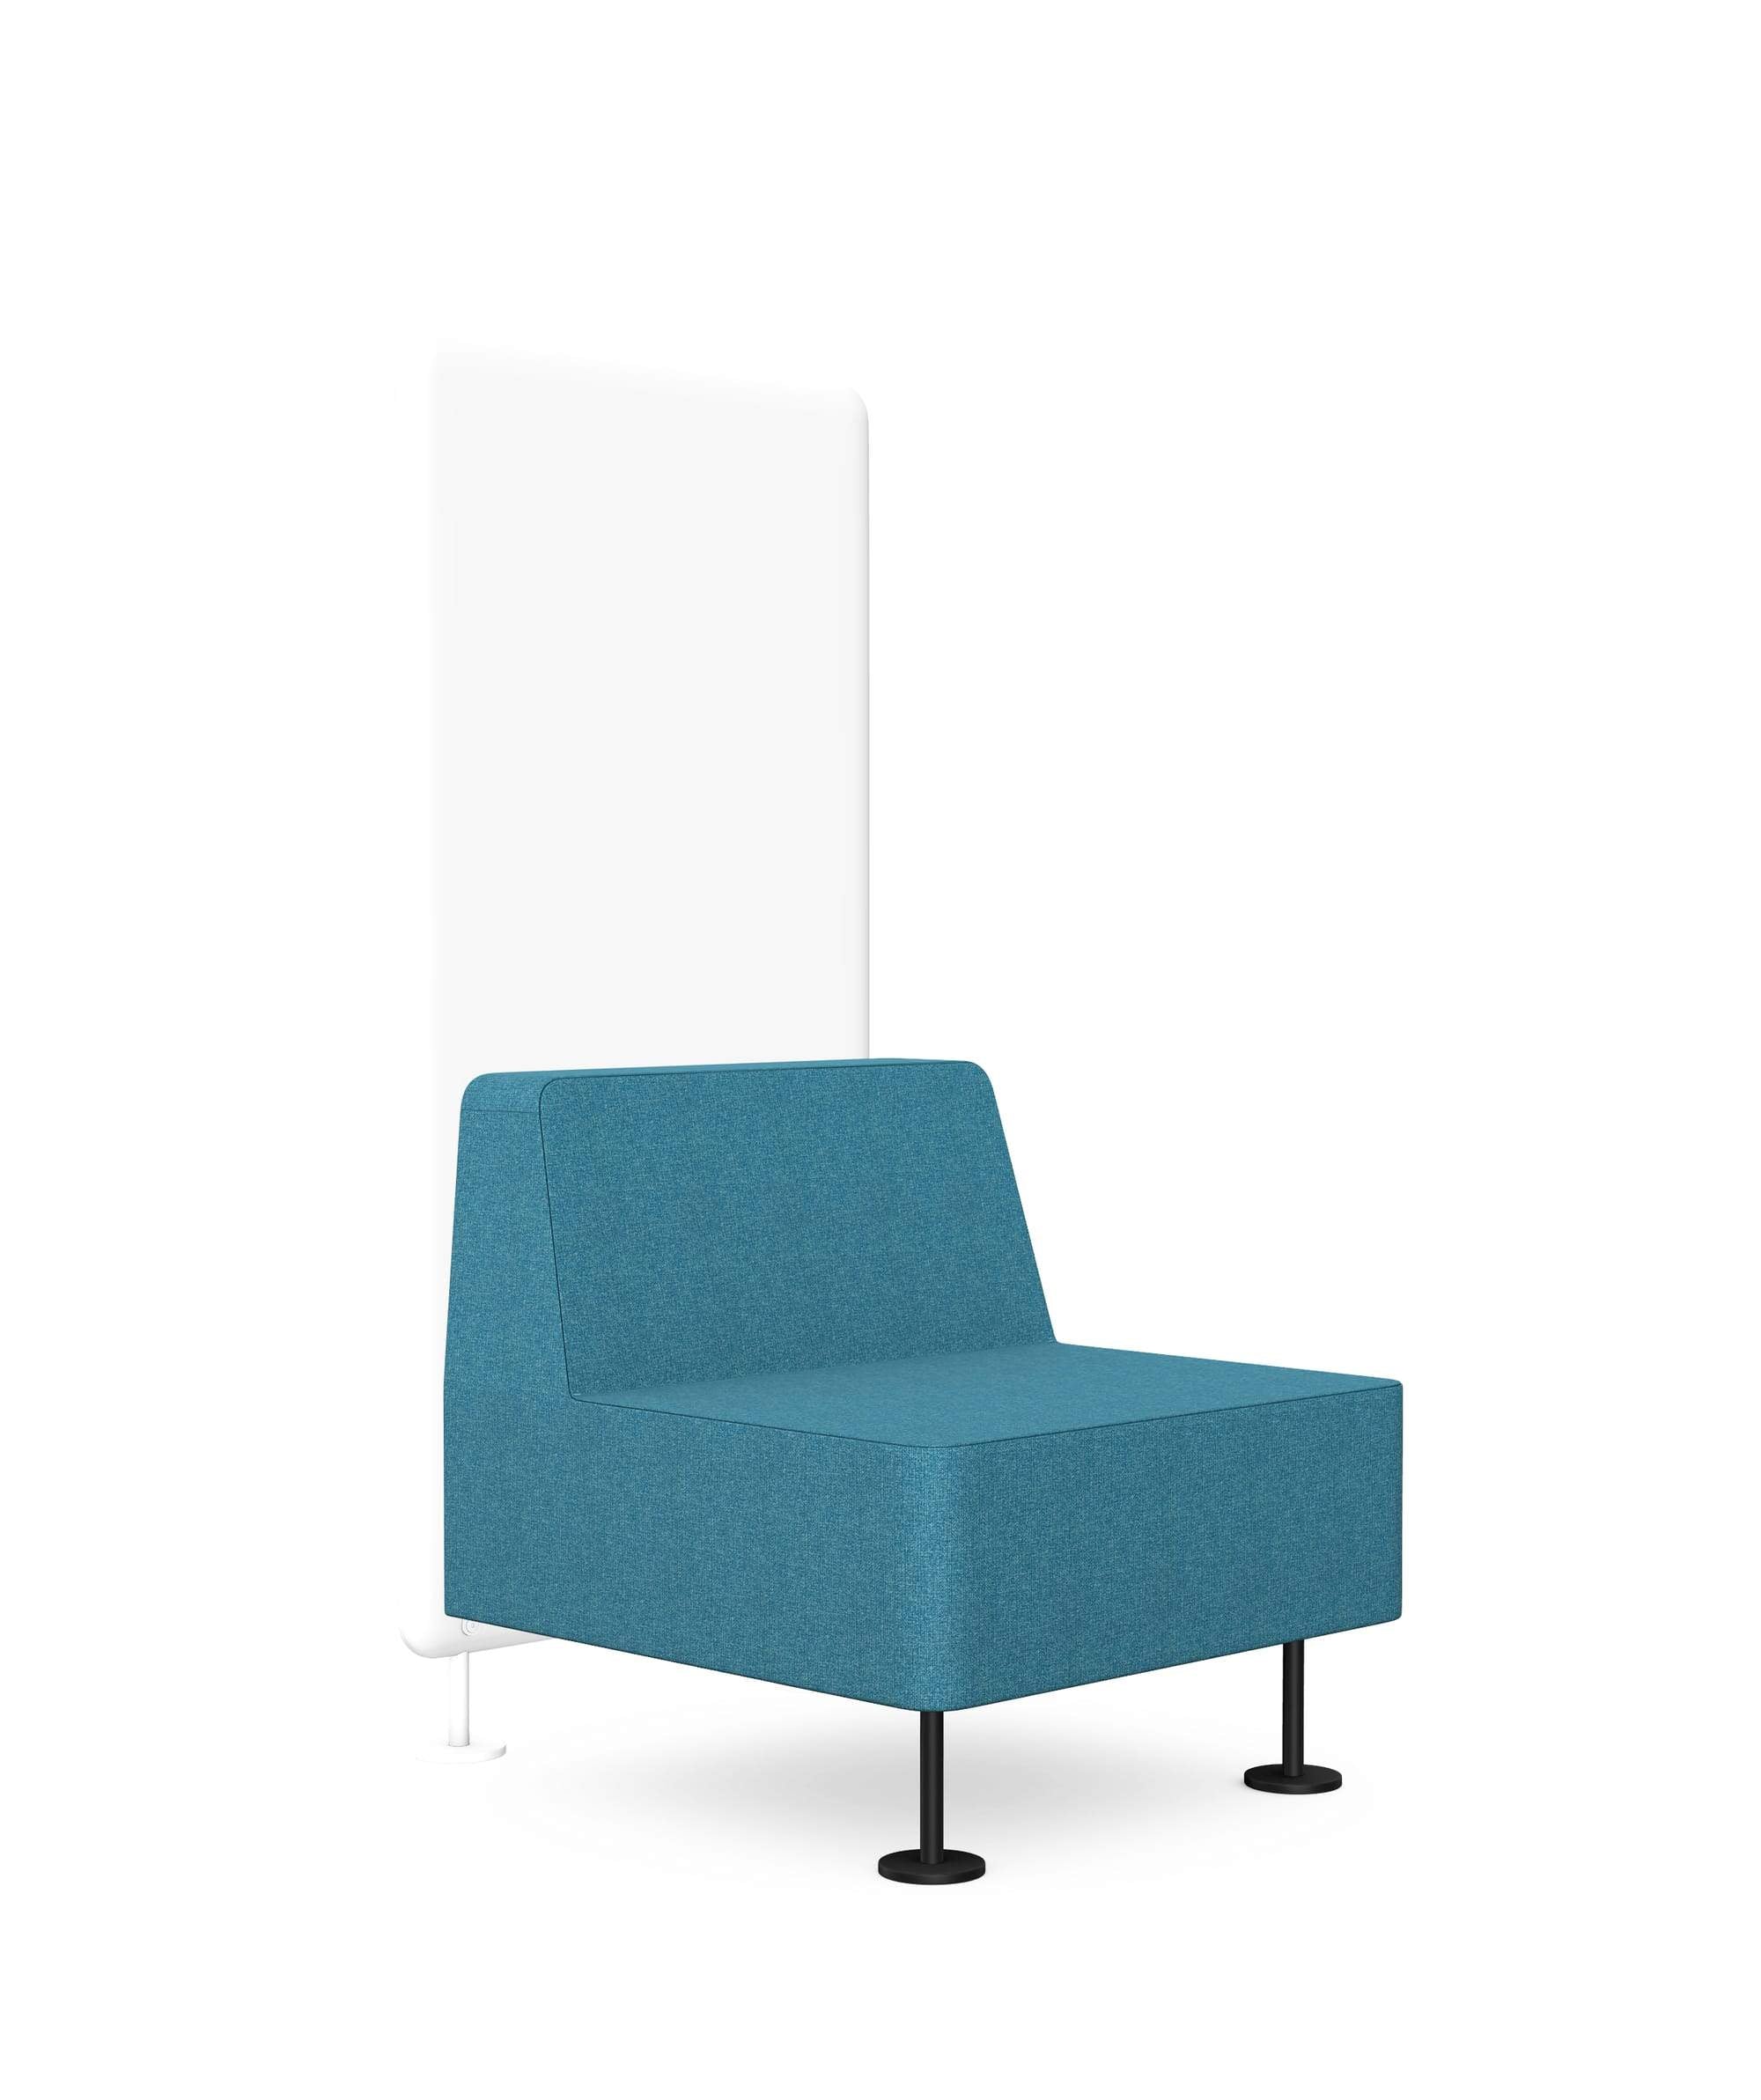 Wall In Armchair to be Connected with 1 Partition Wall - Model 21